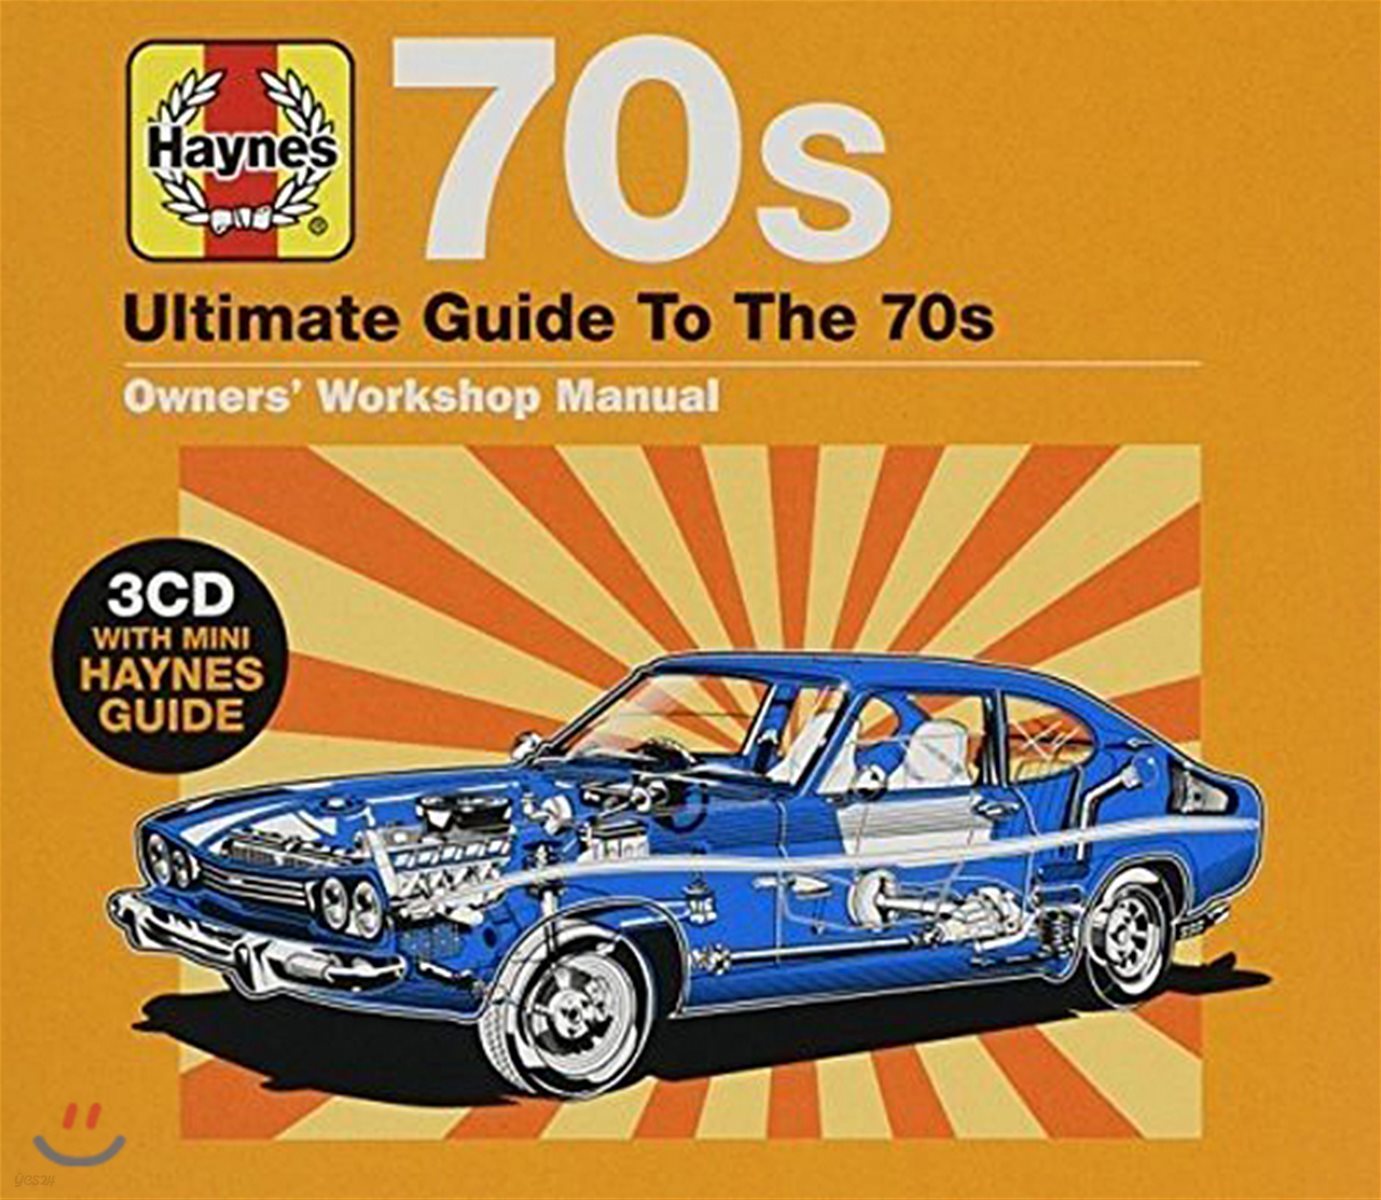 Haynes Ultimate Guide To 70s